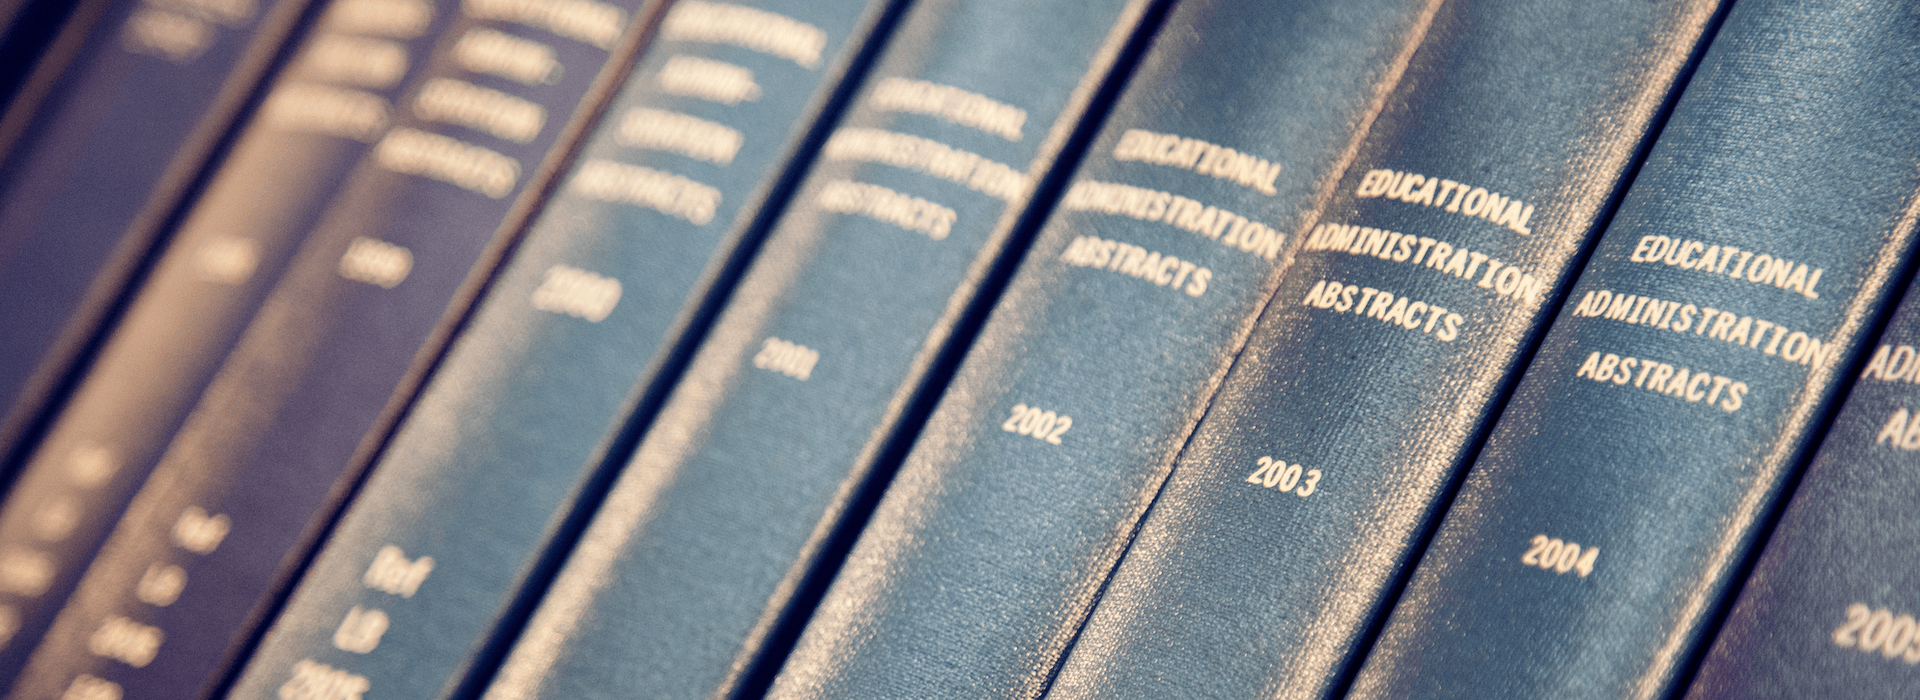 Stock Image of Educational Administration Books